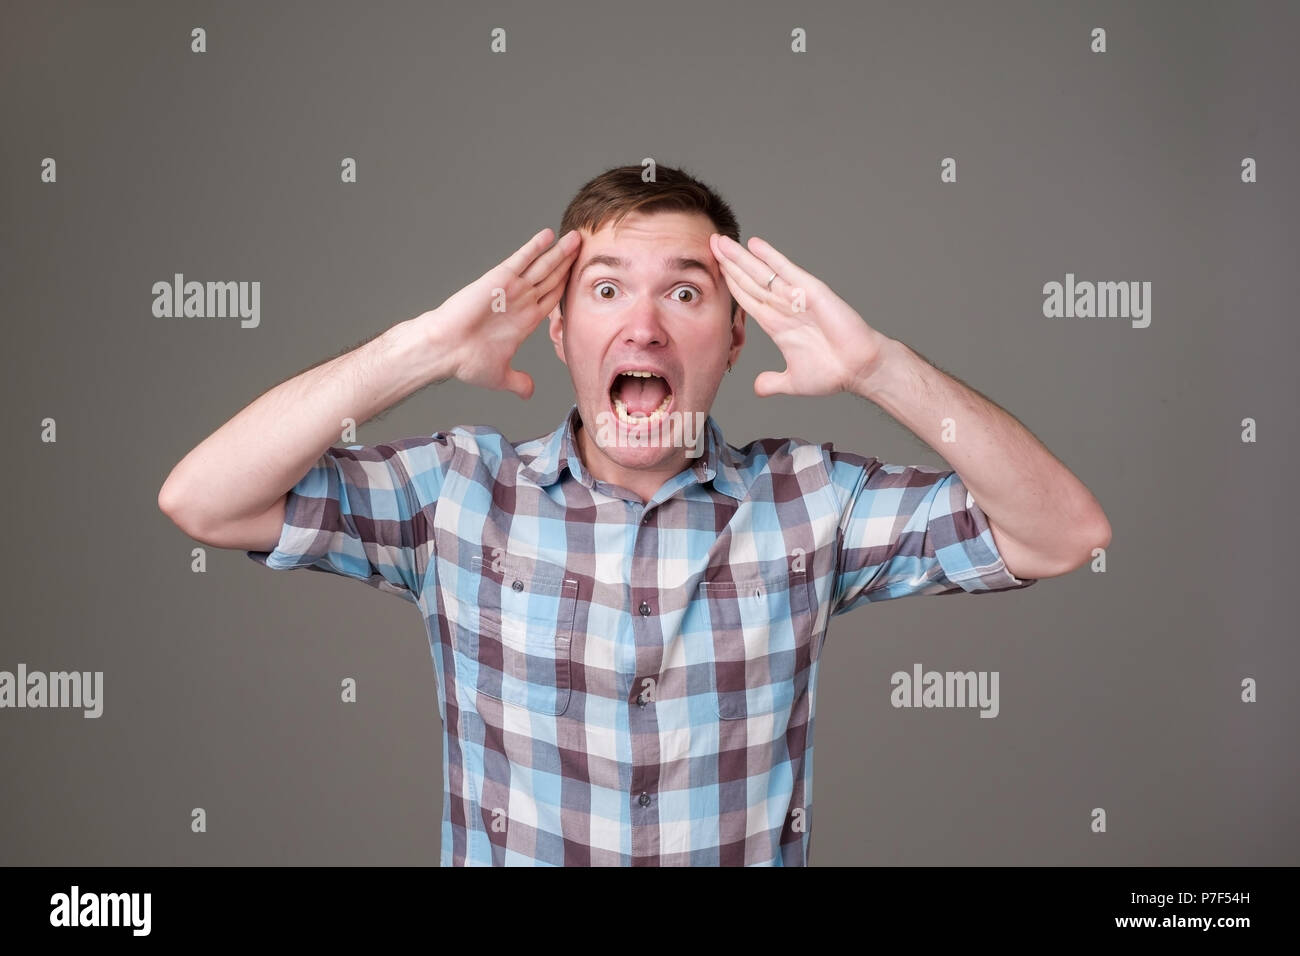 Portrait of young european man with shocked facial expression. He can not believe his luck or success. Stock Photo